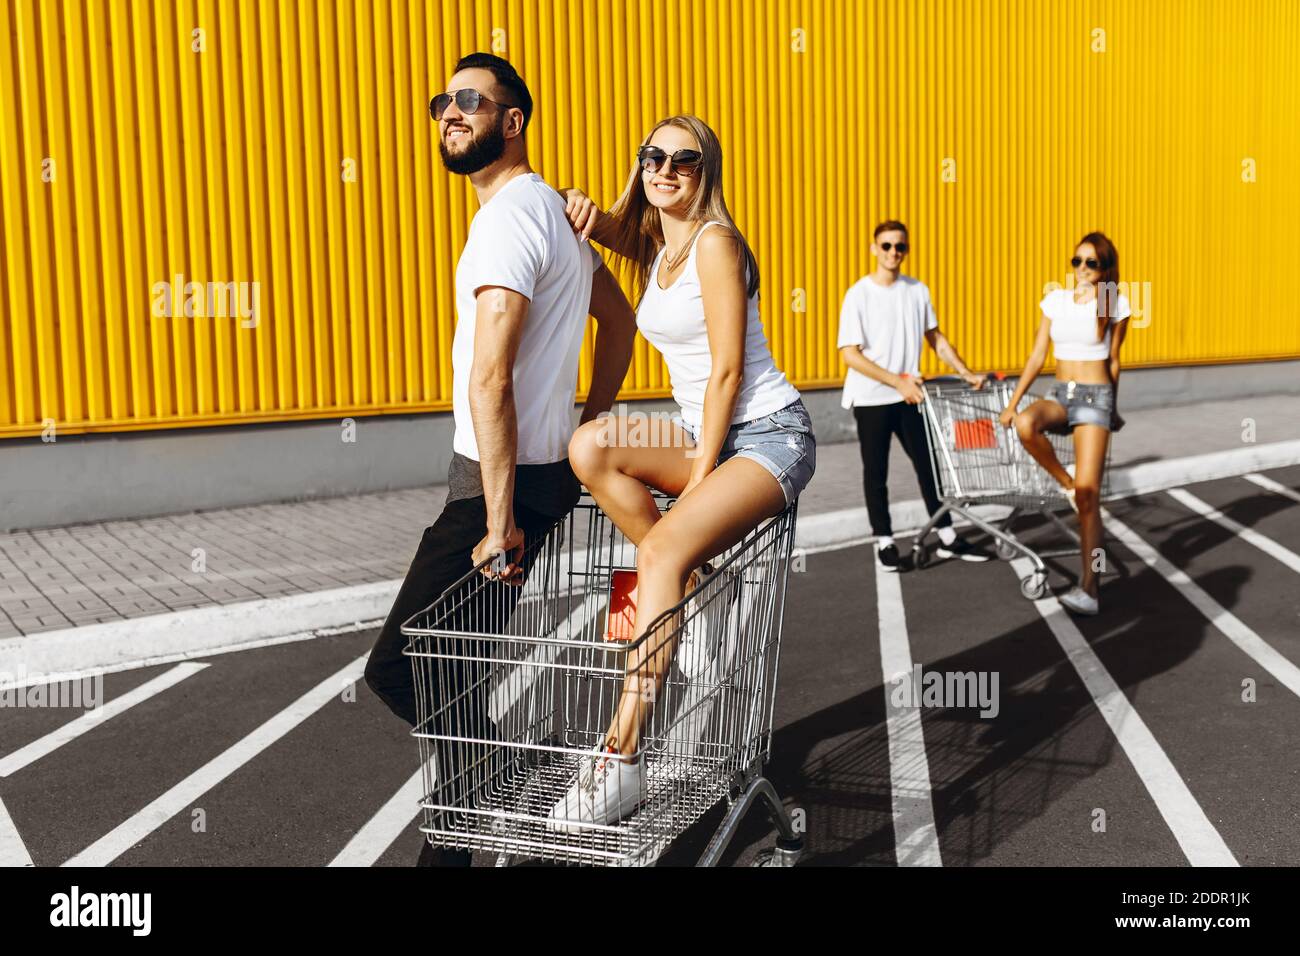 A group of young people, friends in white t-shirts, fun ride on carts near the store, supermarket, friends having fun, laughing in Sunny weather. Shop Stock Photo